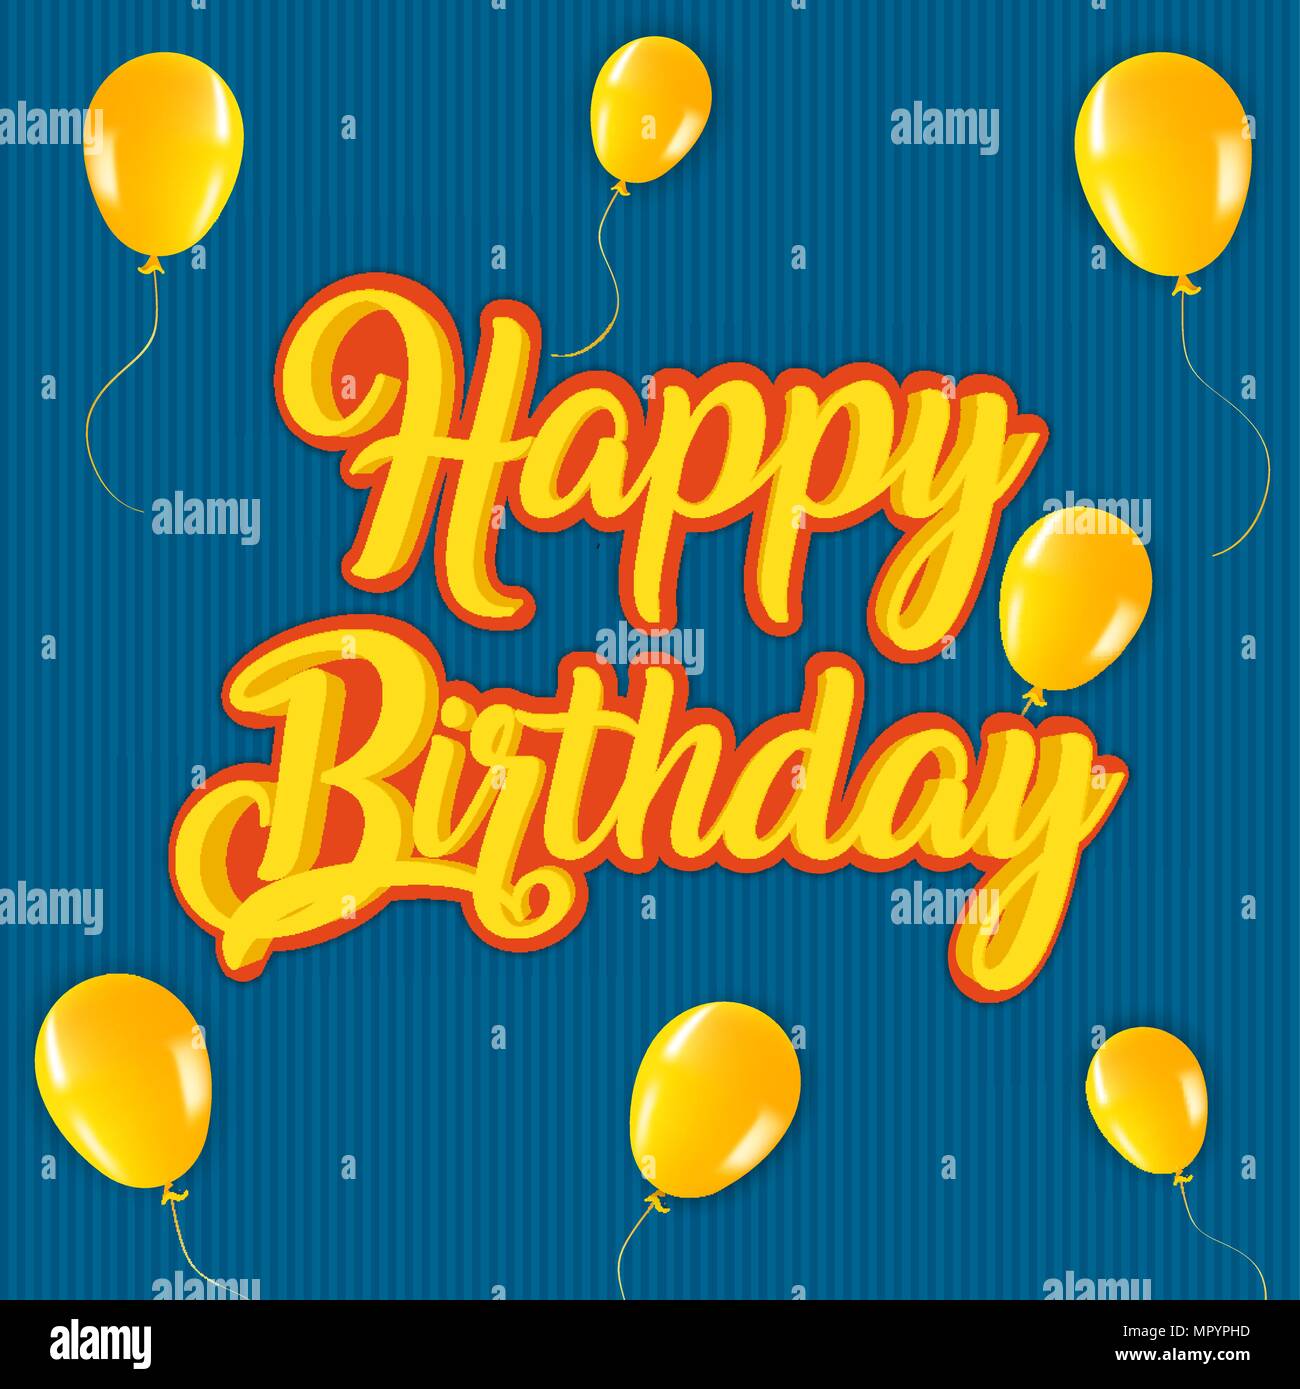 Happy Birthday retro style greeting card with vintage typography quote and party balloon decoration. EPS10 vector. Stock Vector